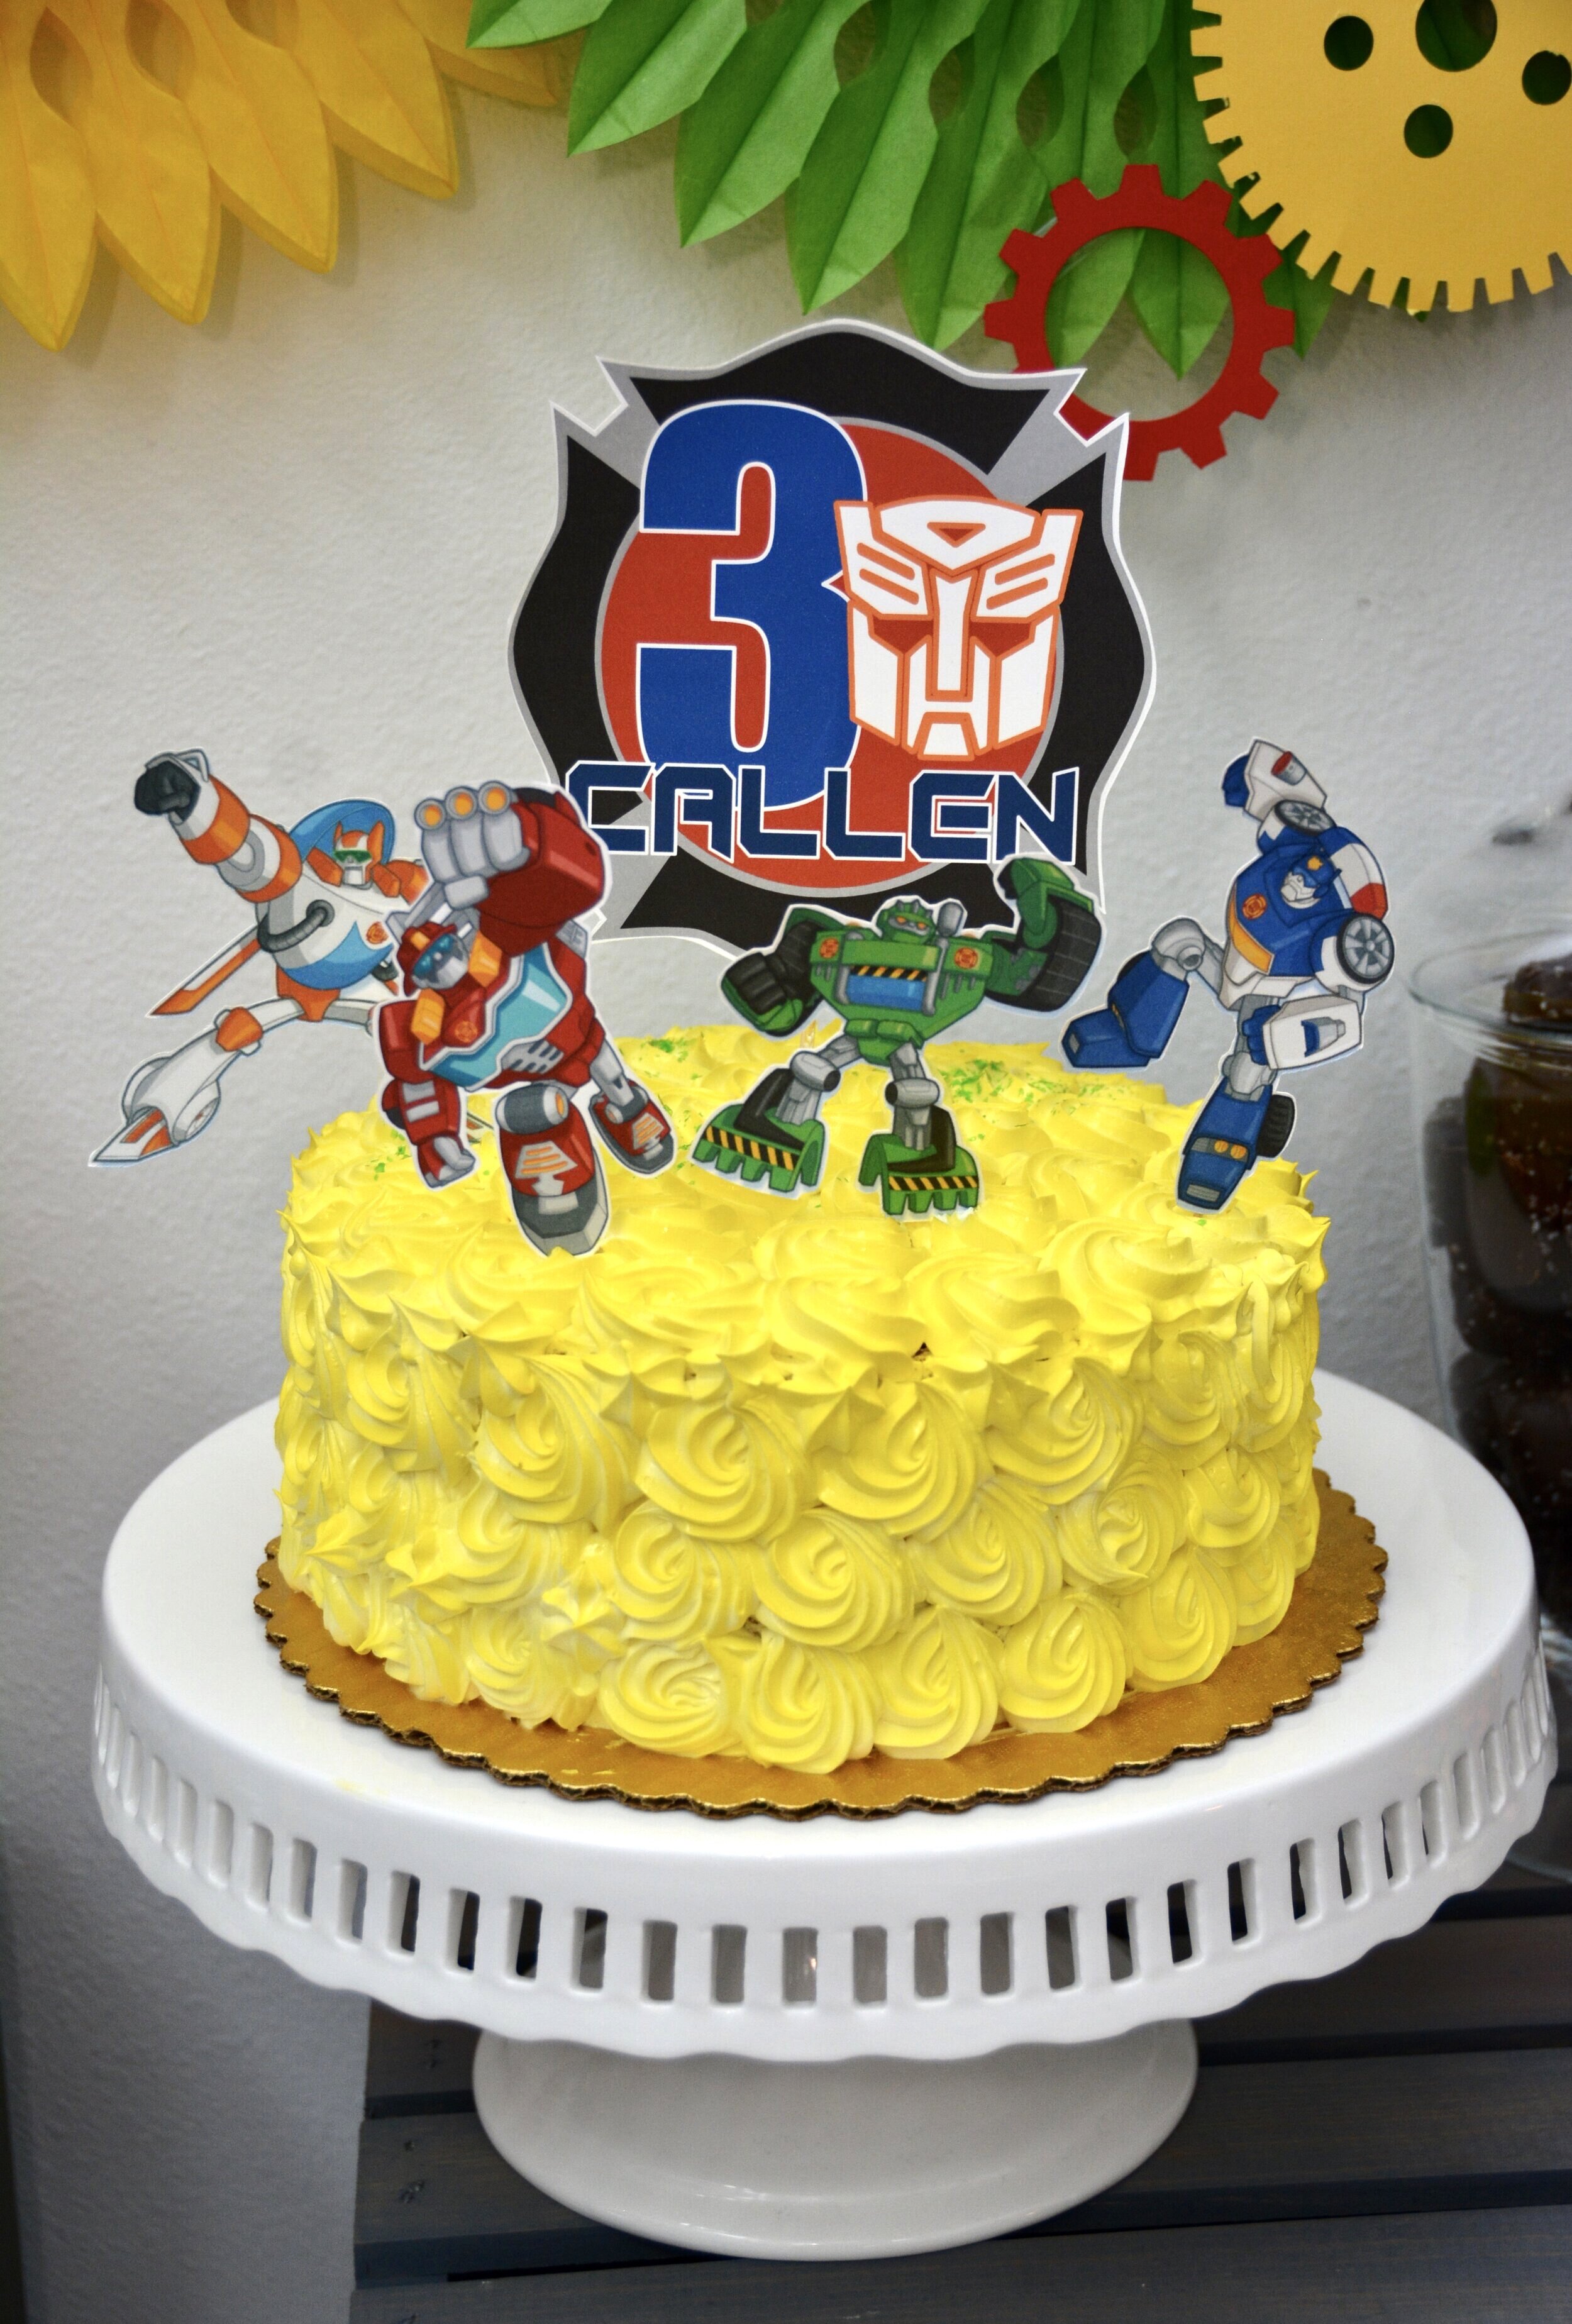 Transformers Rescue Bots inspired cake - Cakes by Aunt Sally | Facebook